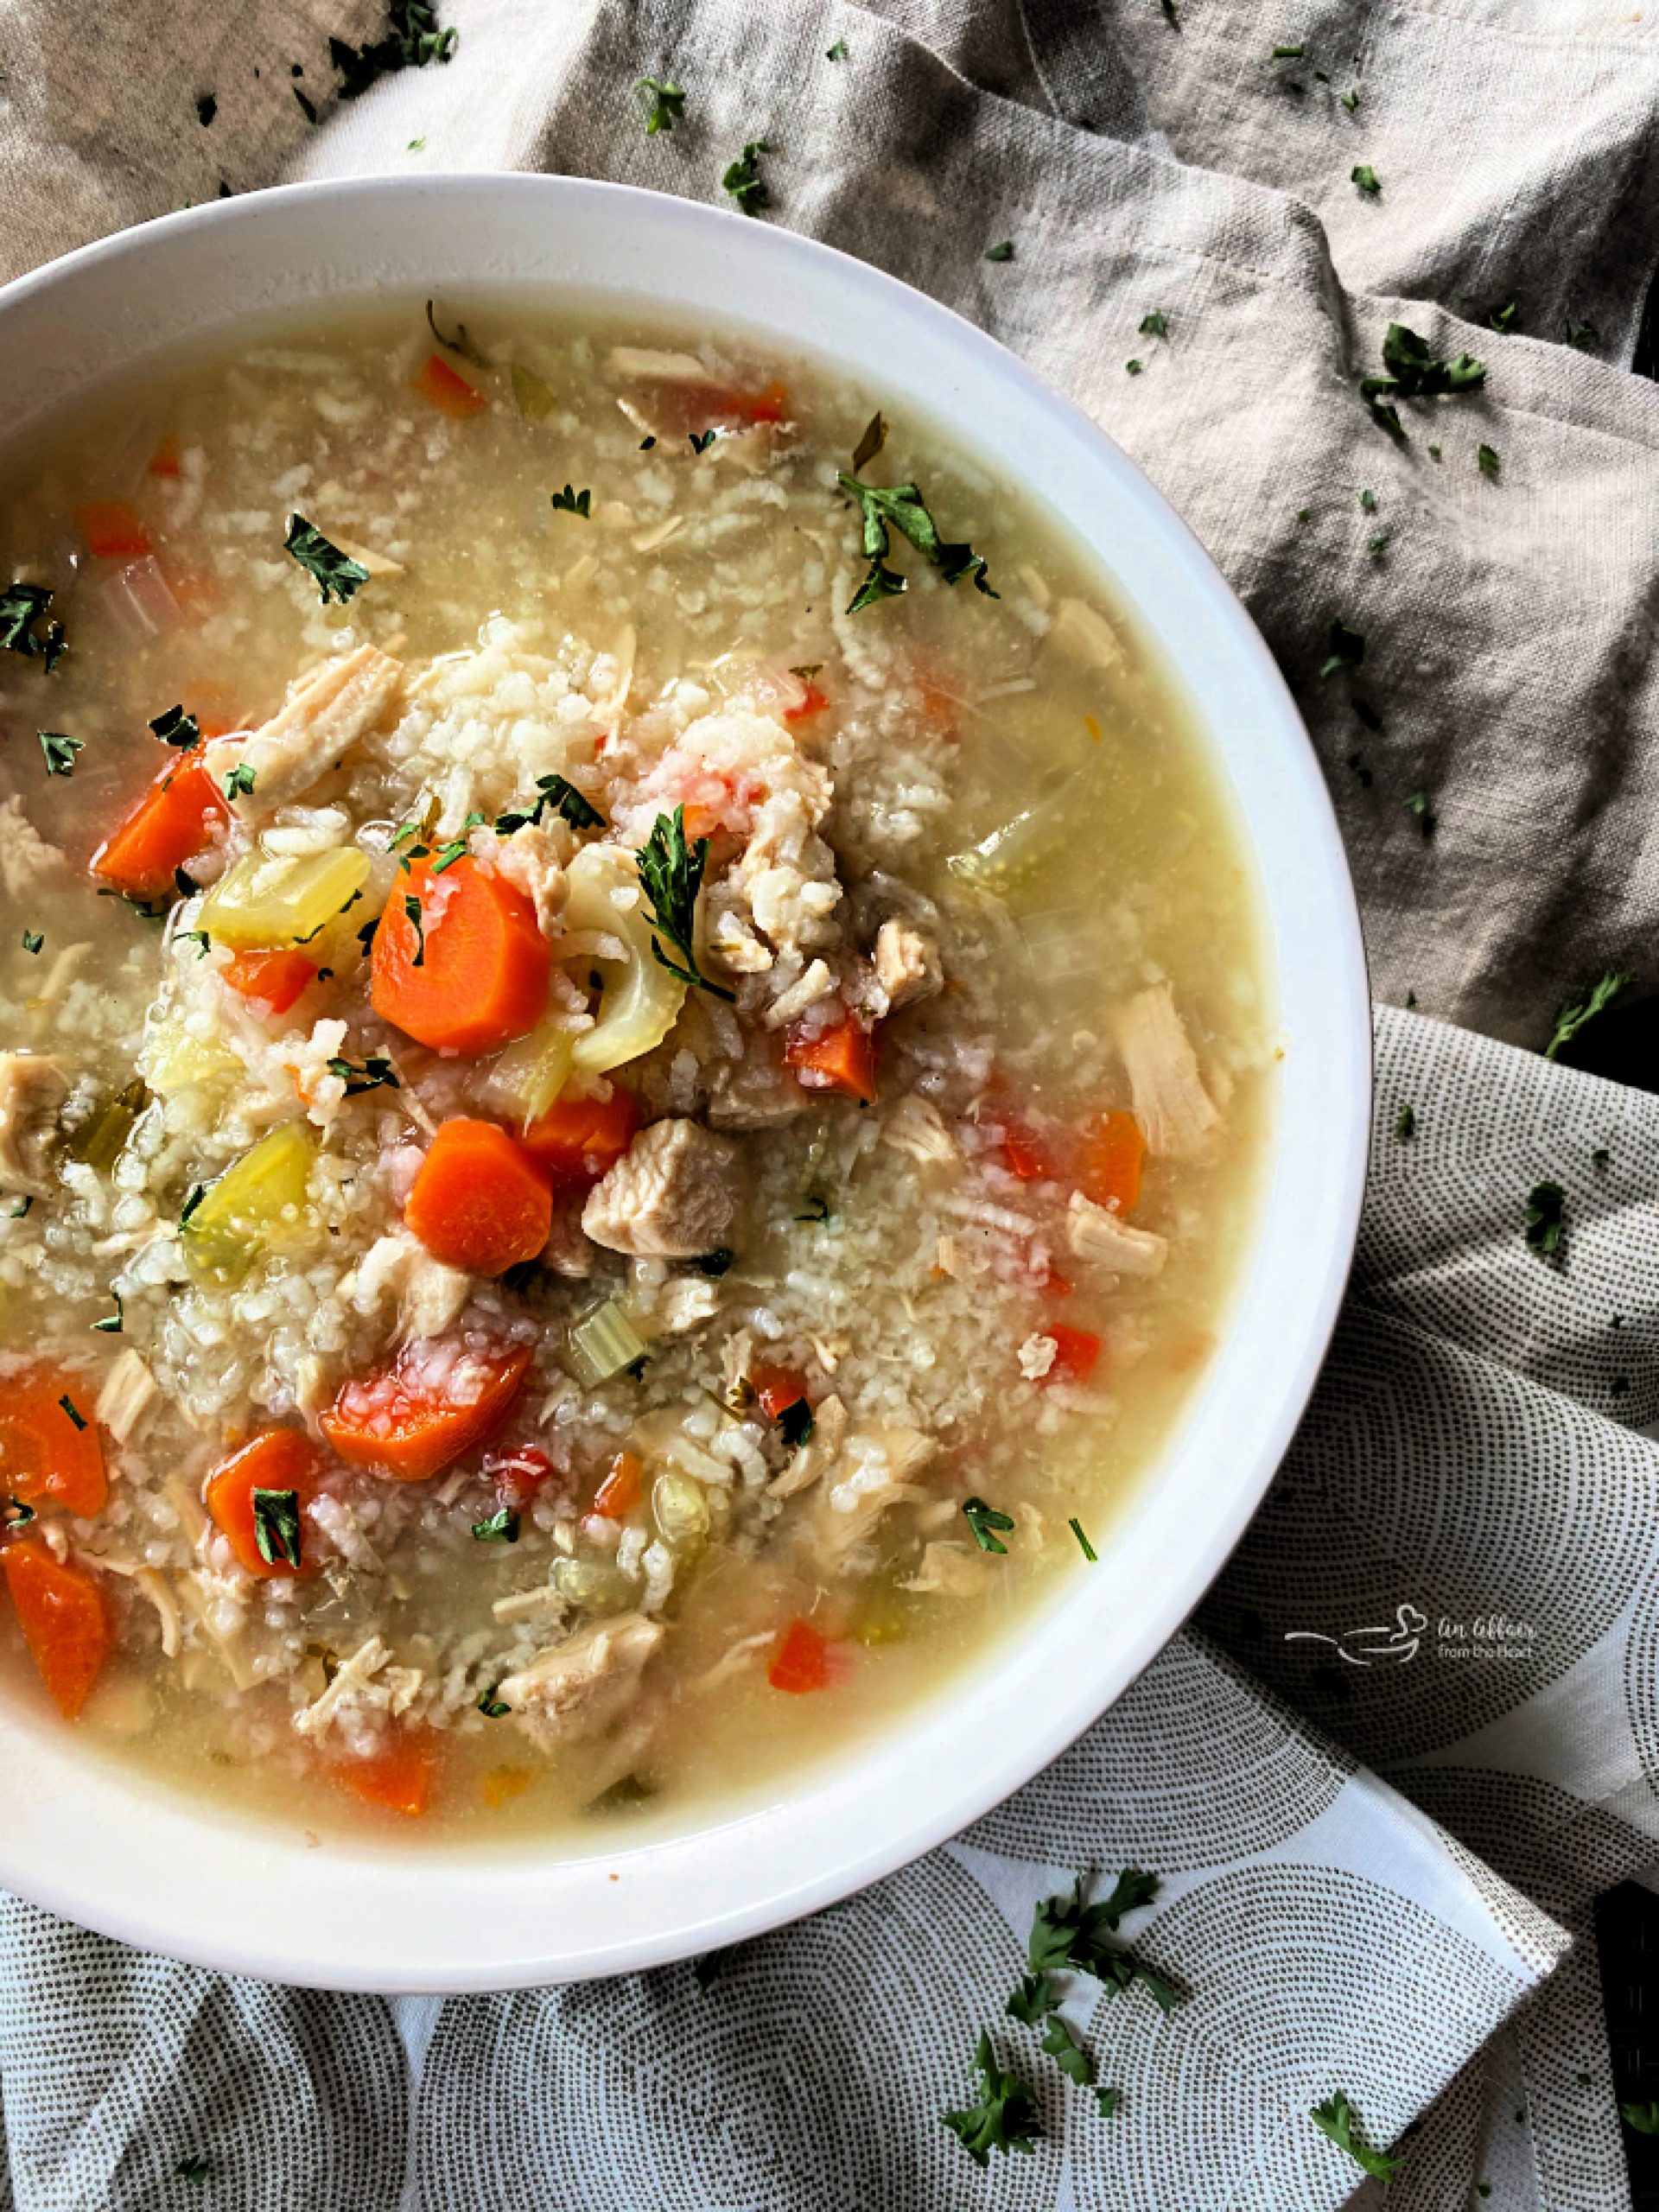 https://anaffairfromtheheart.com/wp-content/uploads/2020/10/Instant-Pot-Chicken-Rice-Soup-scaled.jpg